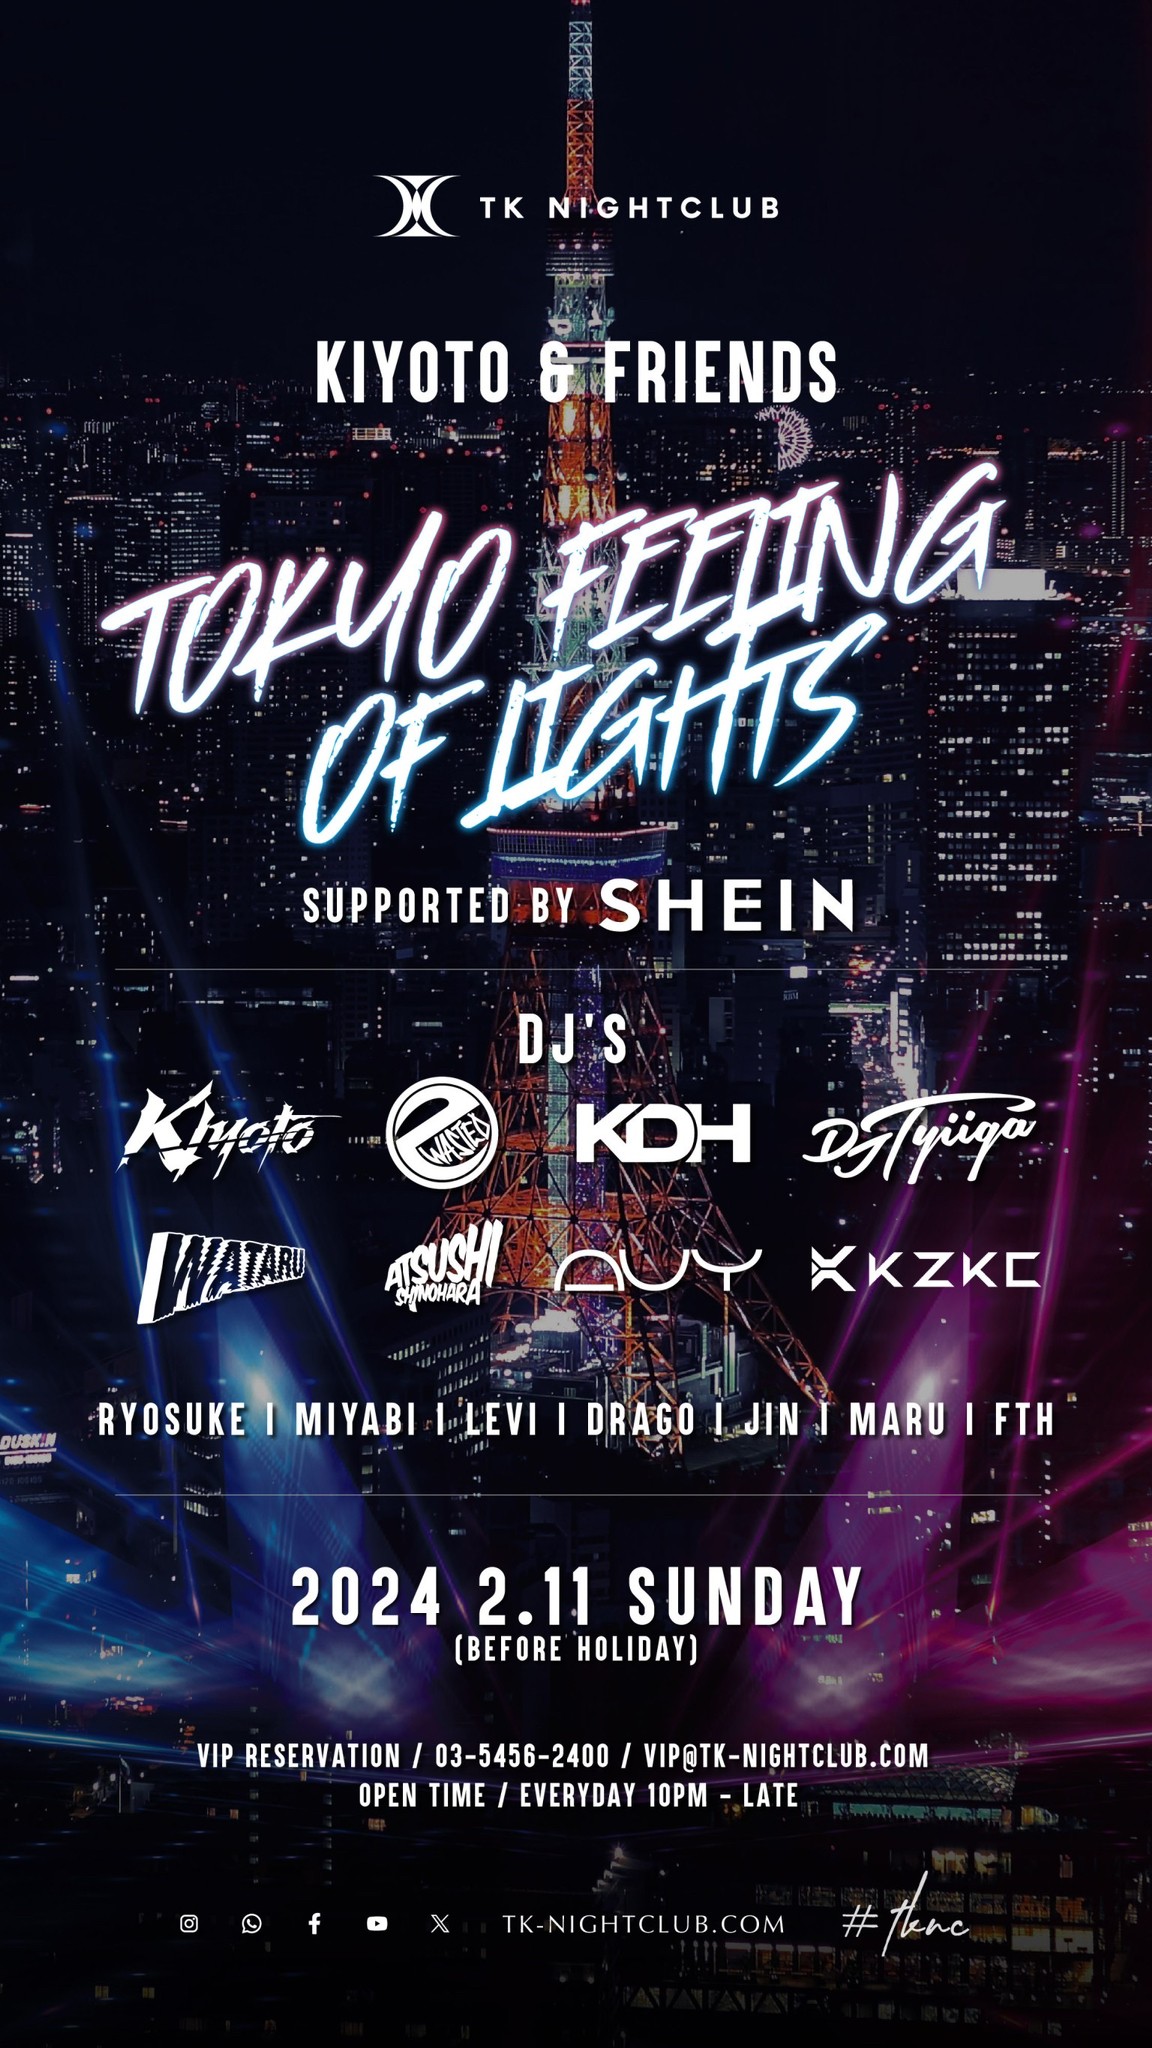 KIYOTO & Friends TOKYO FEELING OF LIGHTS Supported by SHEIN